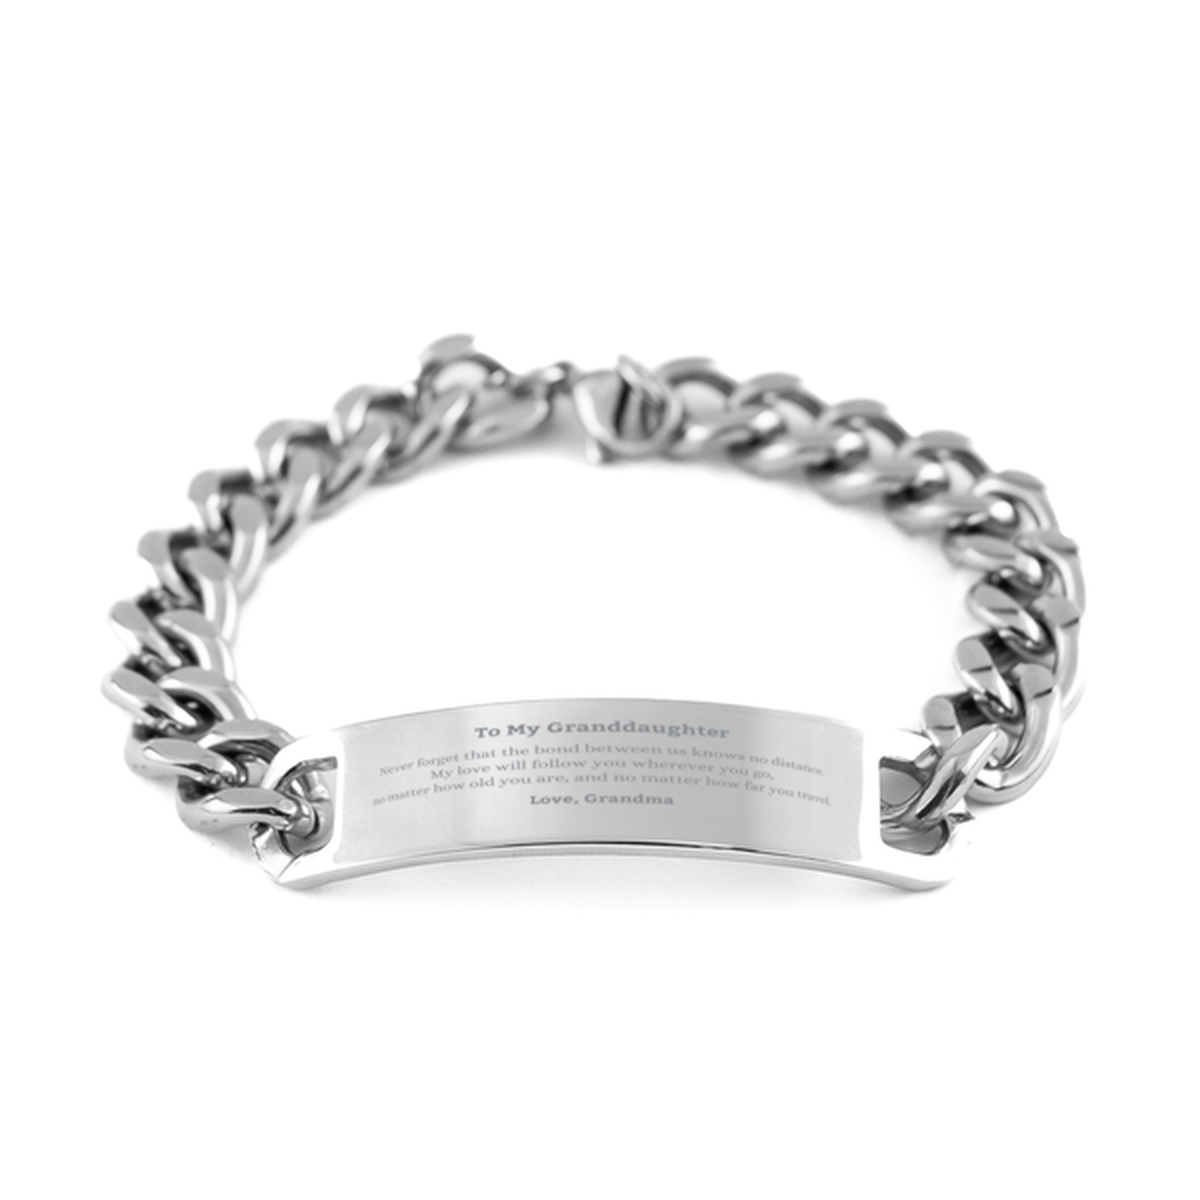 Granddaughter Birthday Gifts from Grandma, Adjustable Cuban Chain Stainless Steel Bracelet for Granddaughter Christmas Graduation Unique Gifts Granddaughter Never forget that the bond between us knows no distance. Love, Grandma